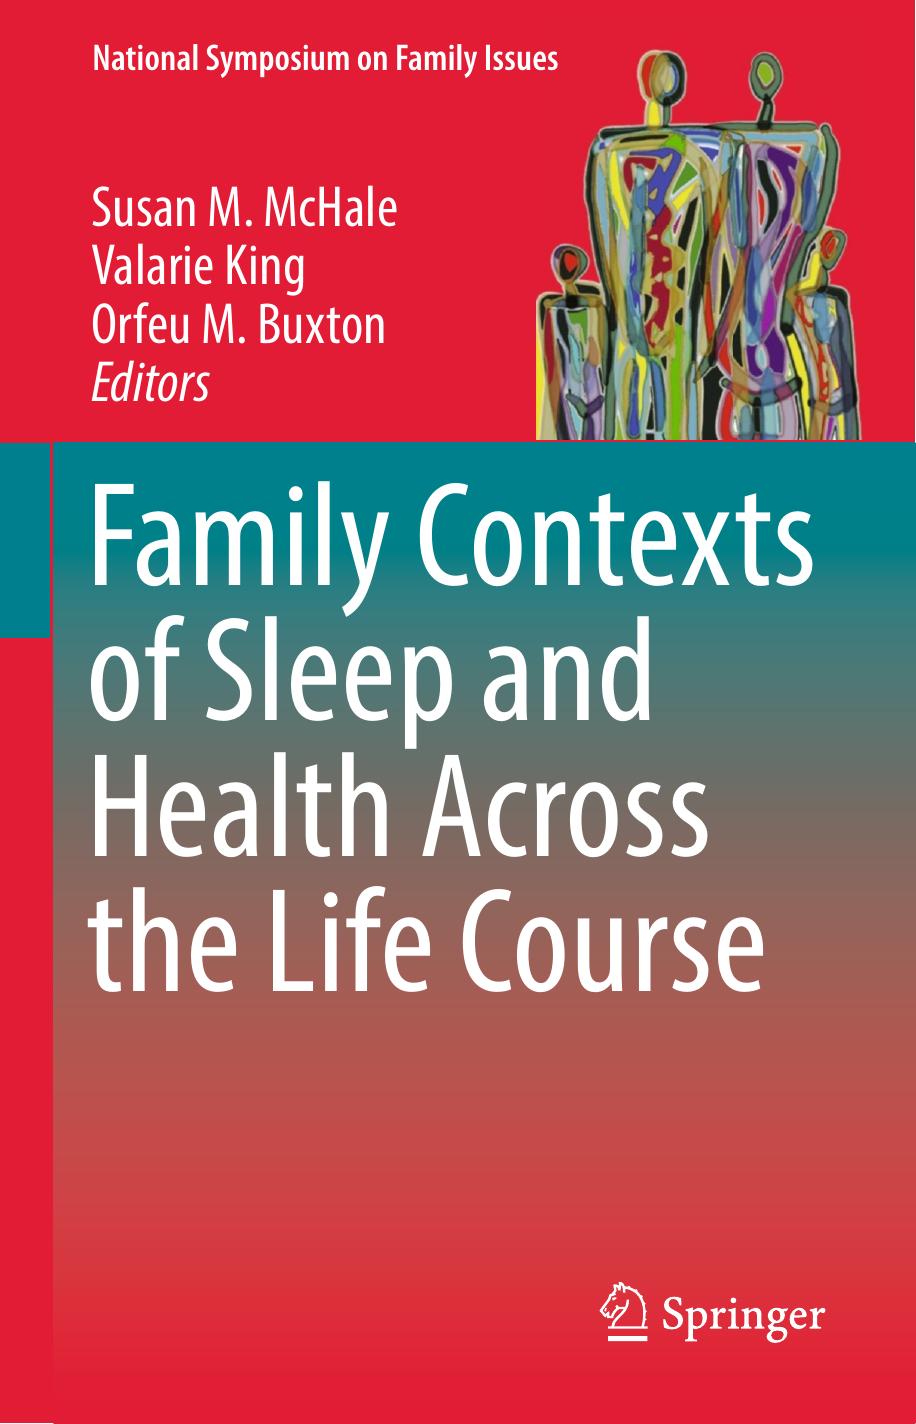 Family Contexts of Sleep and Health Across the Life Course (2018)